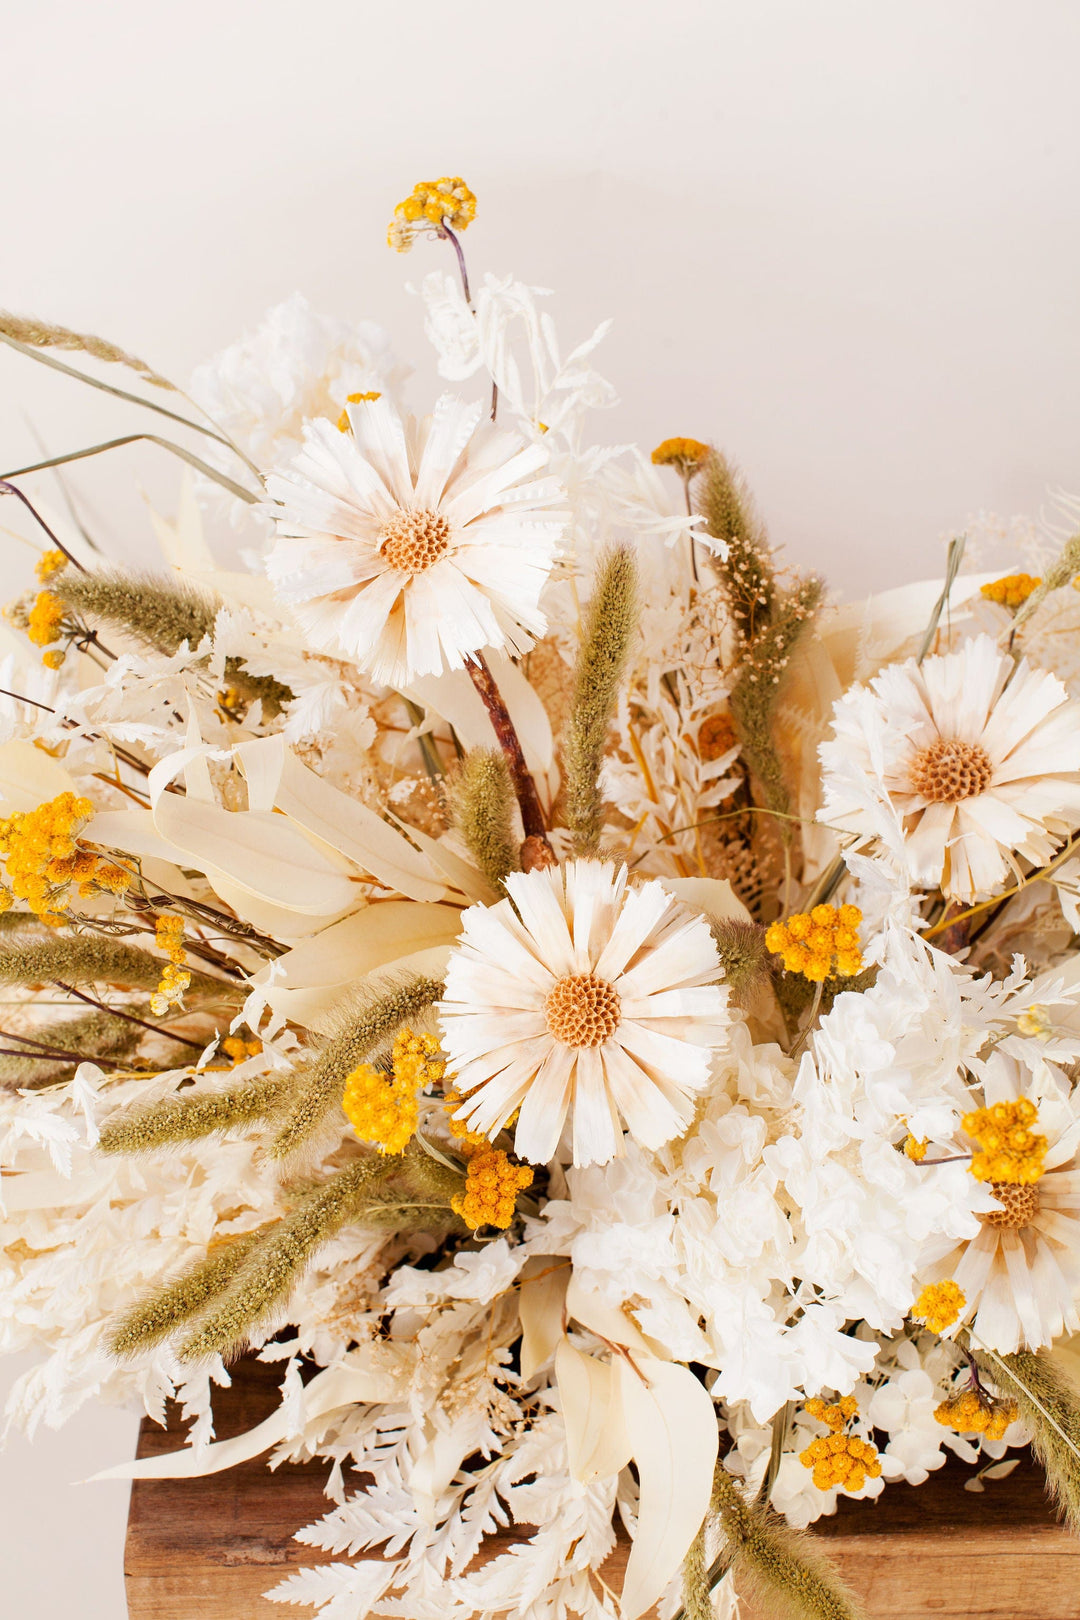 Bunch of white dried flowers